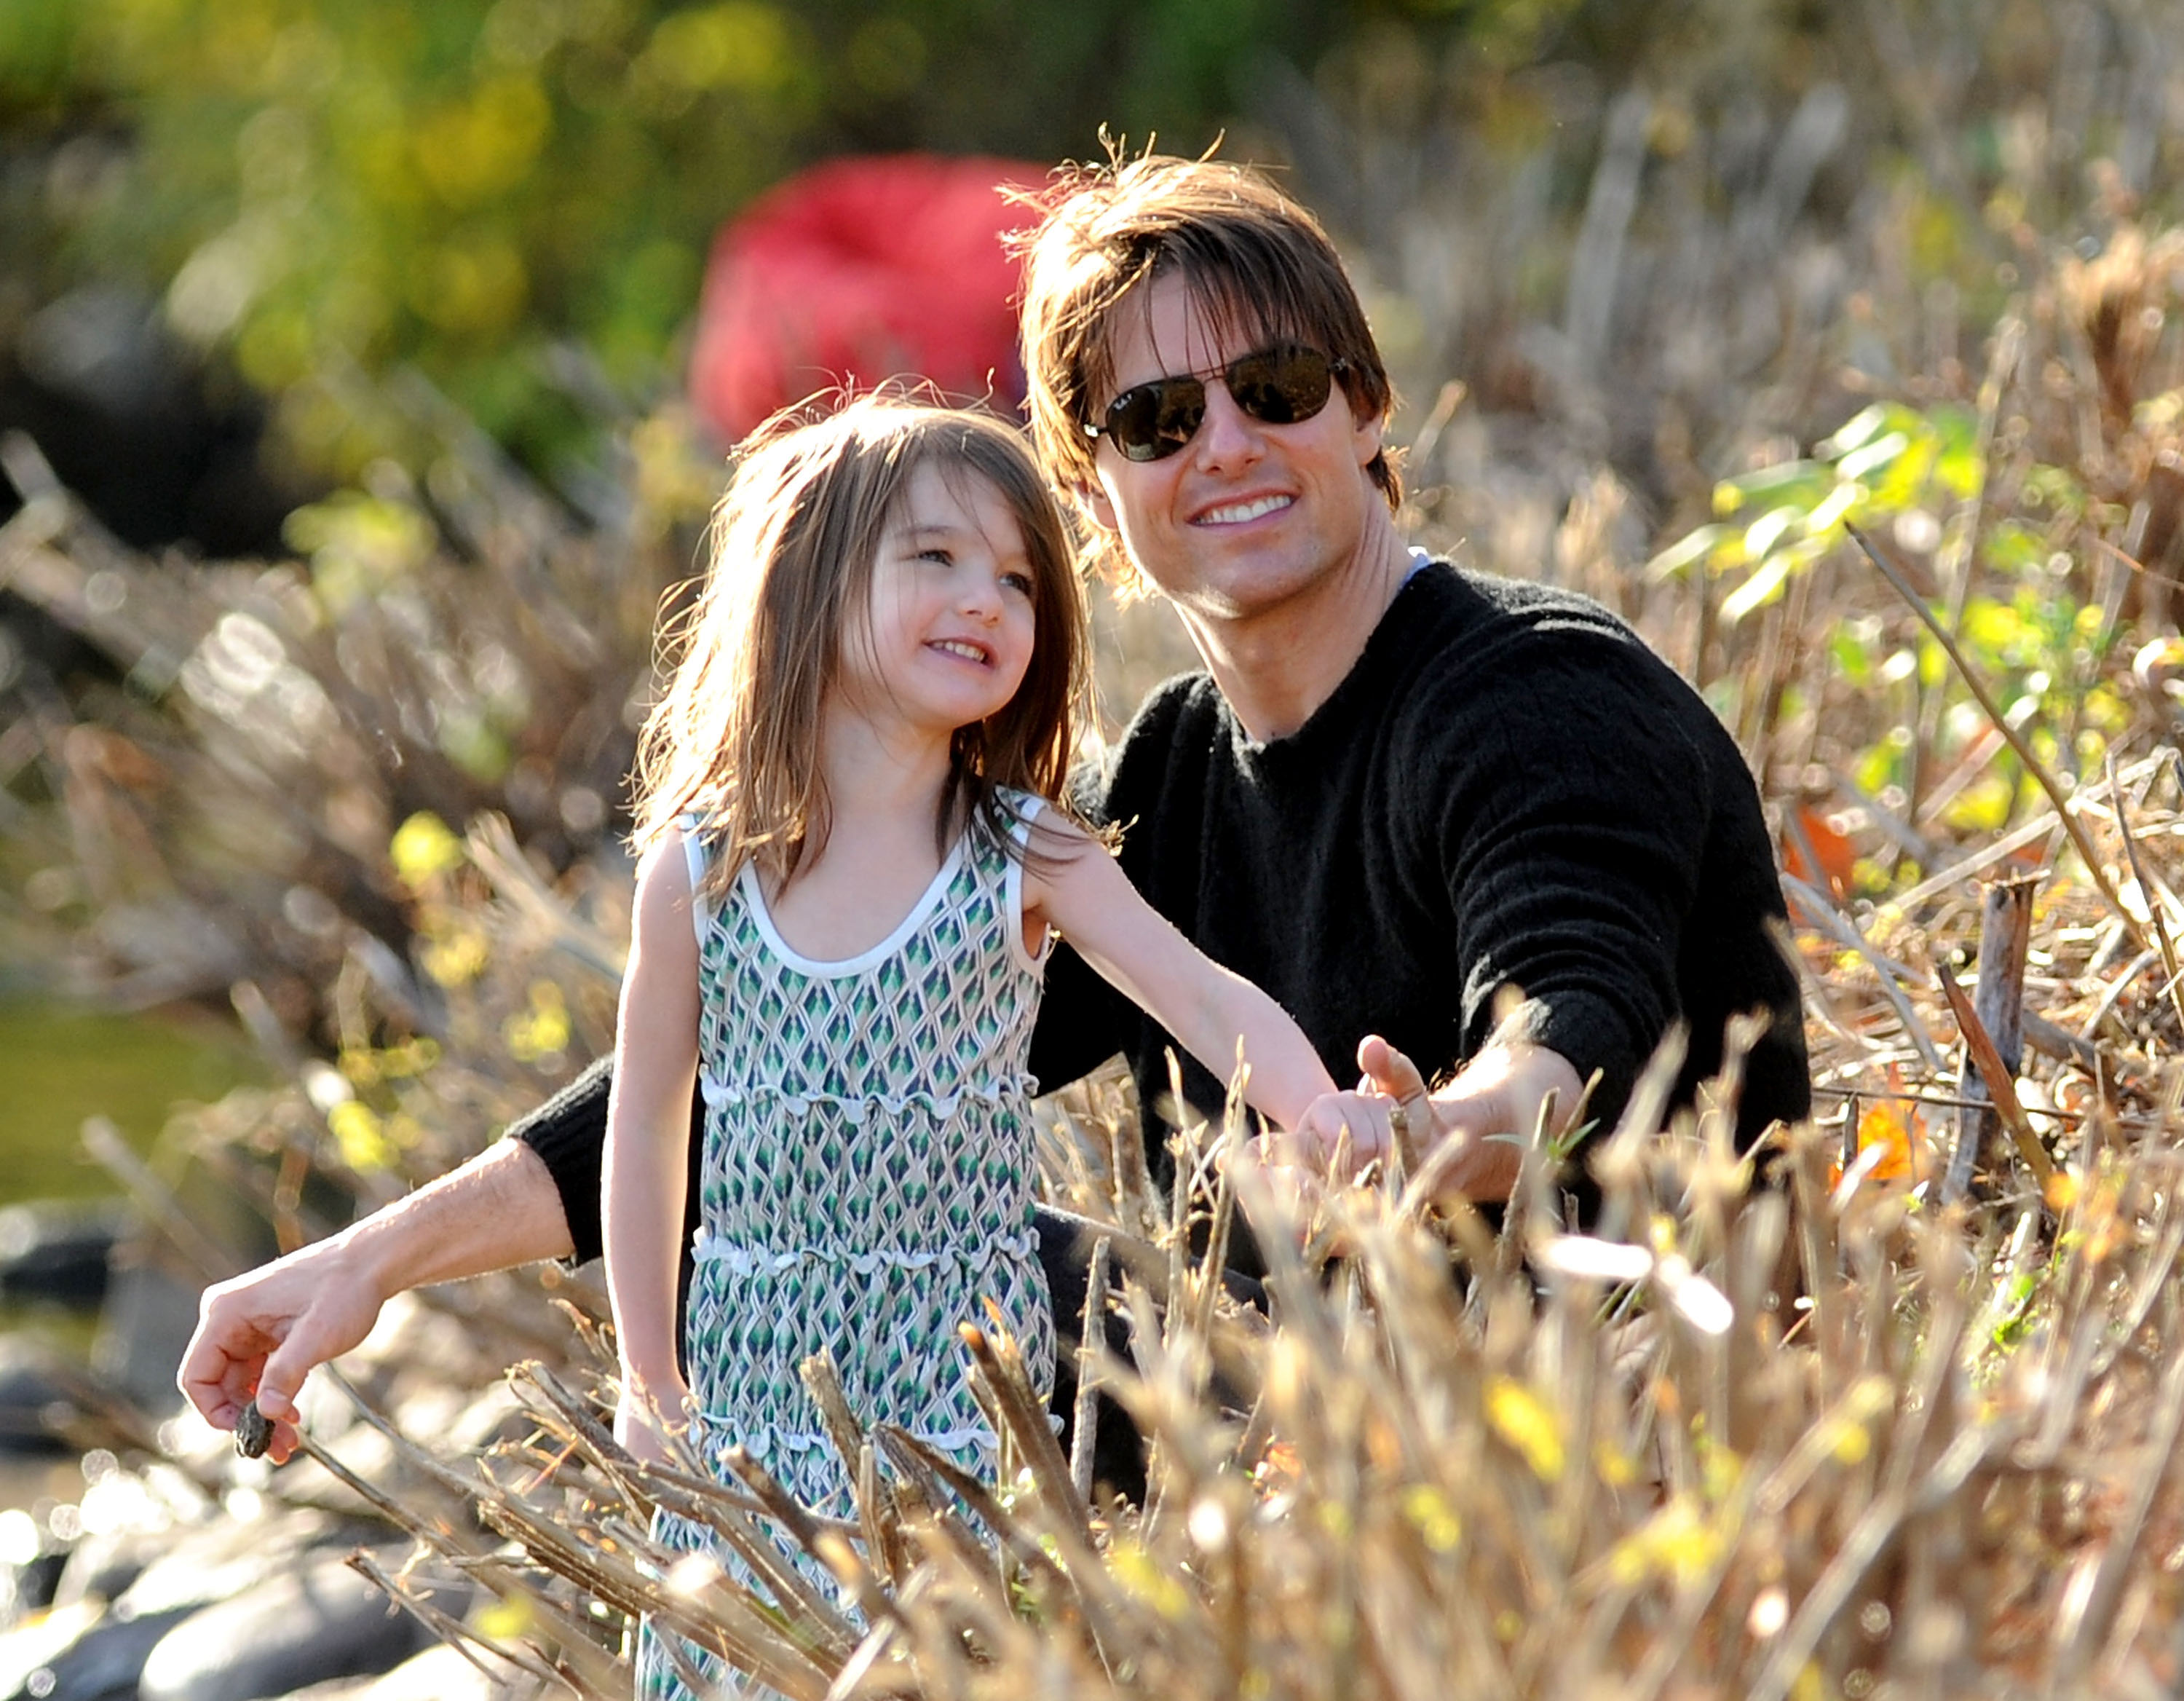 Tom Cruise and his daughter Suri in Massachusetts in 2009 | Source: Getty Images